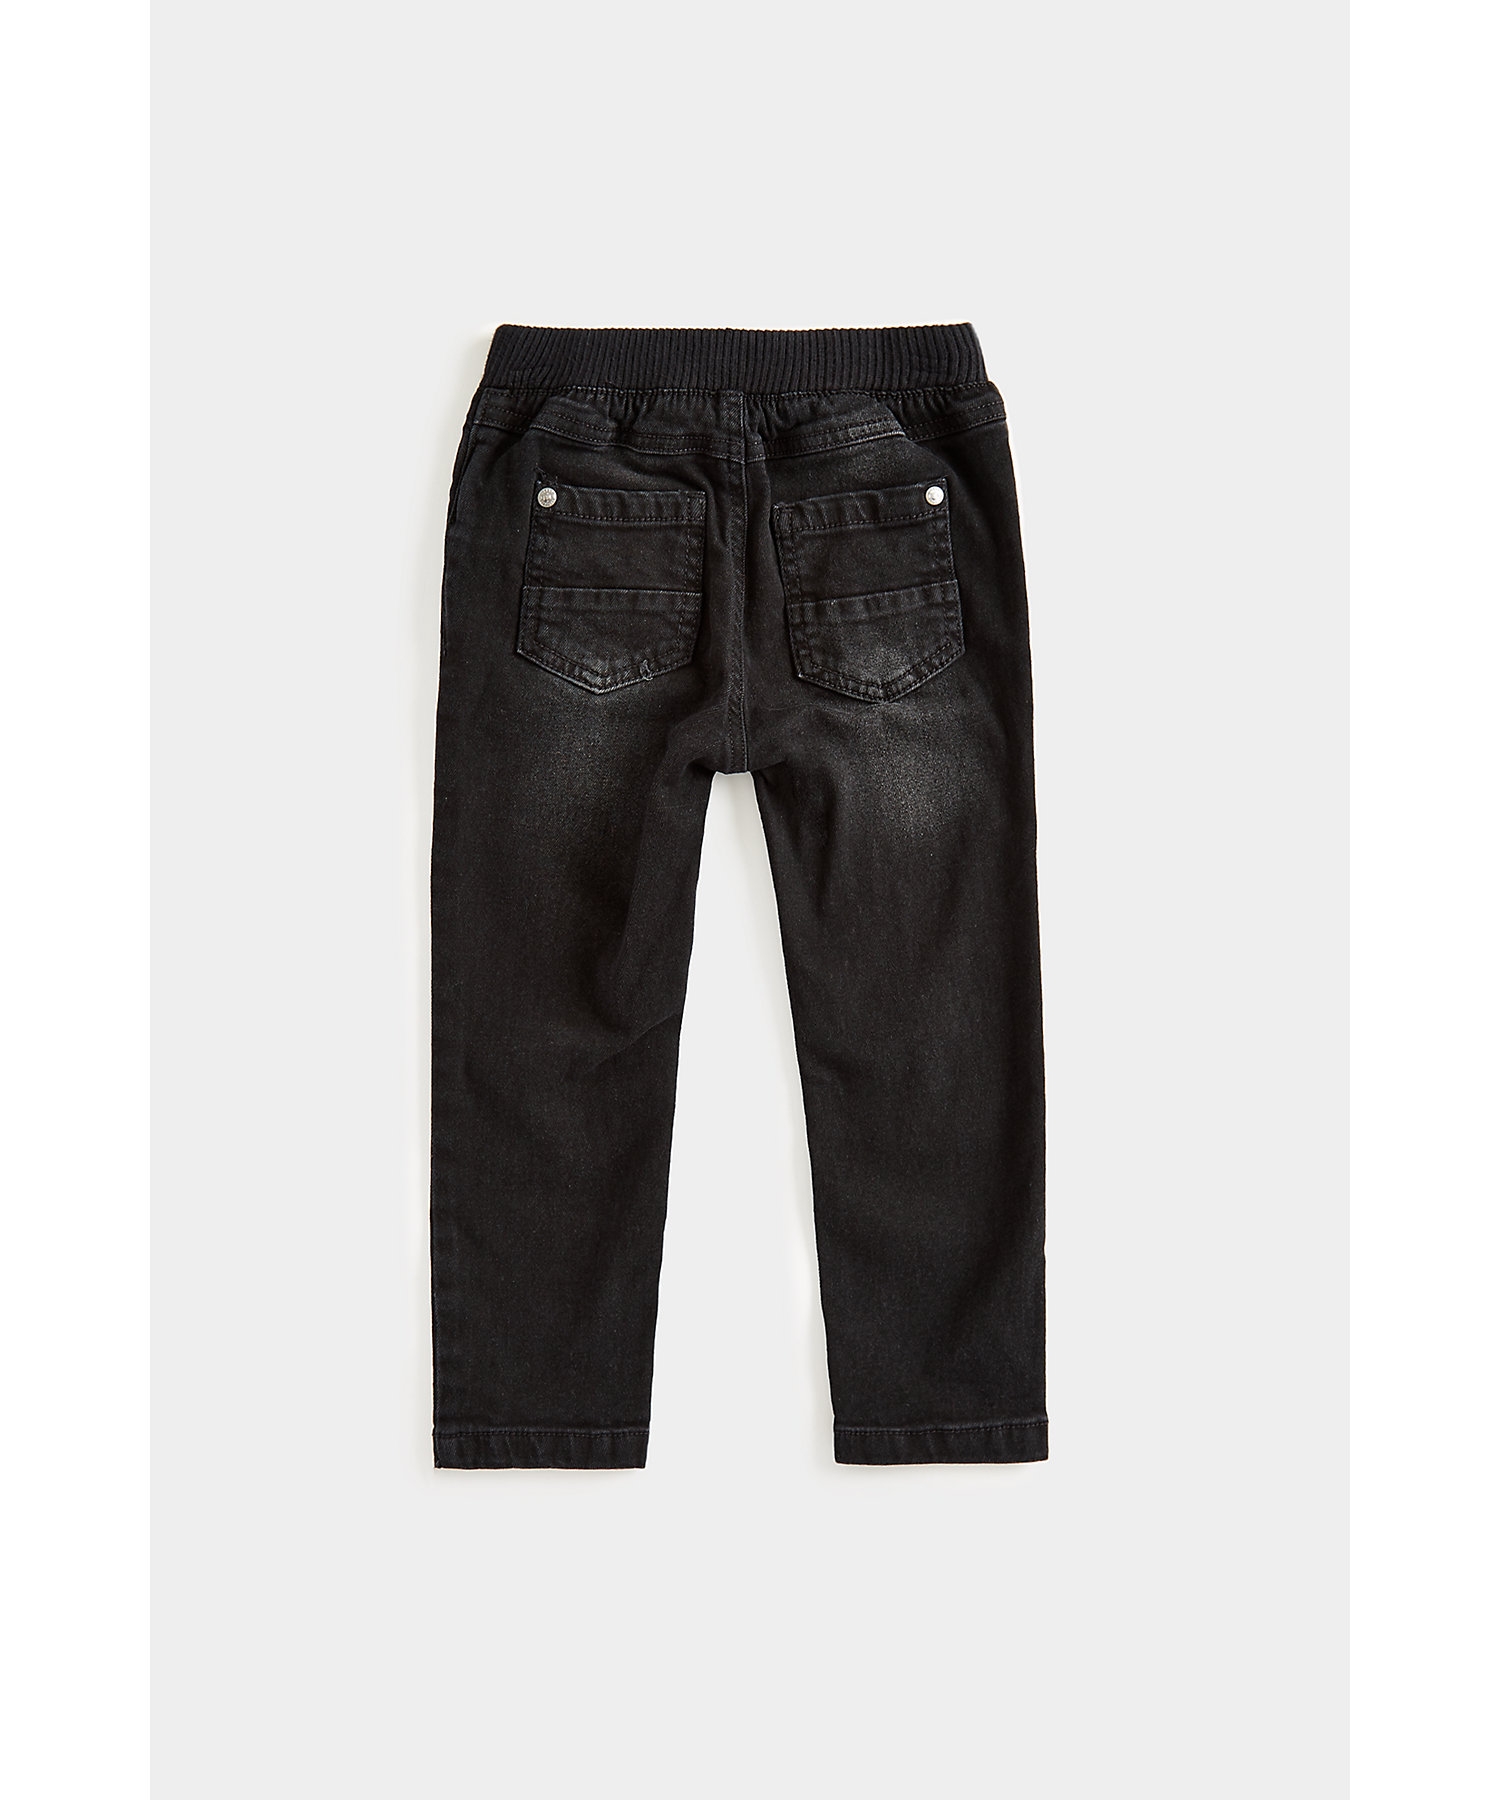 Boys Jeans with Cord -Black